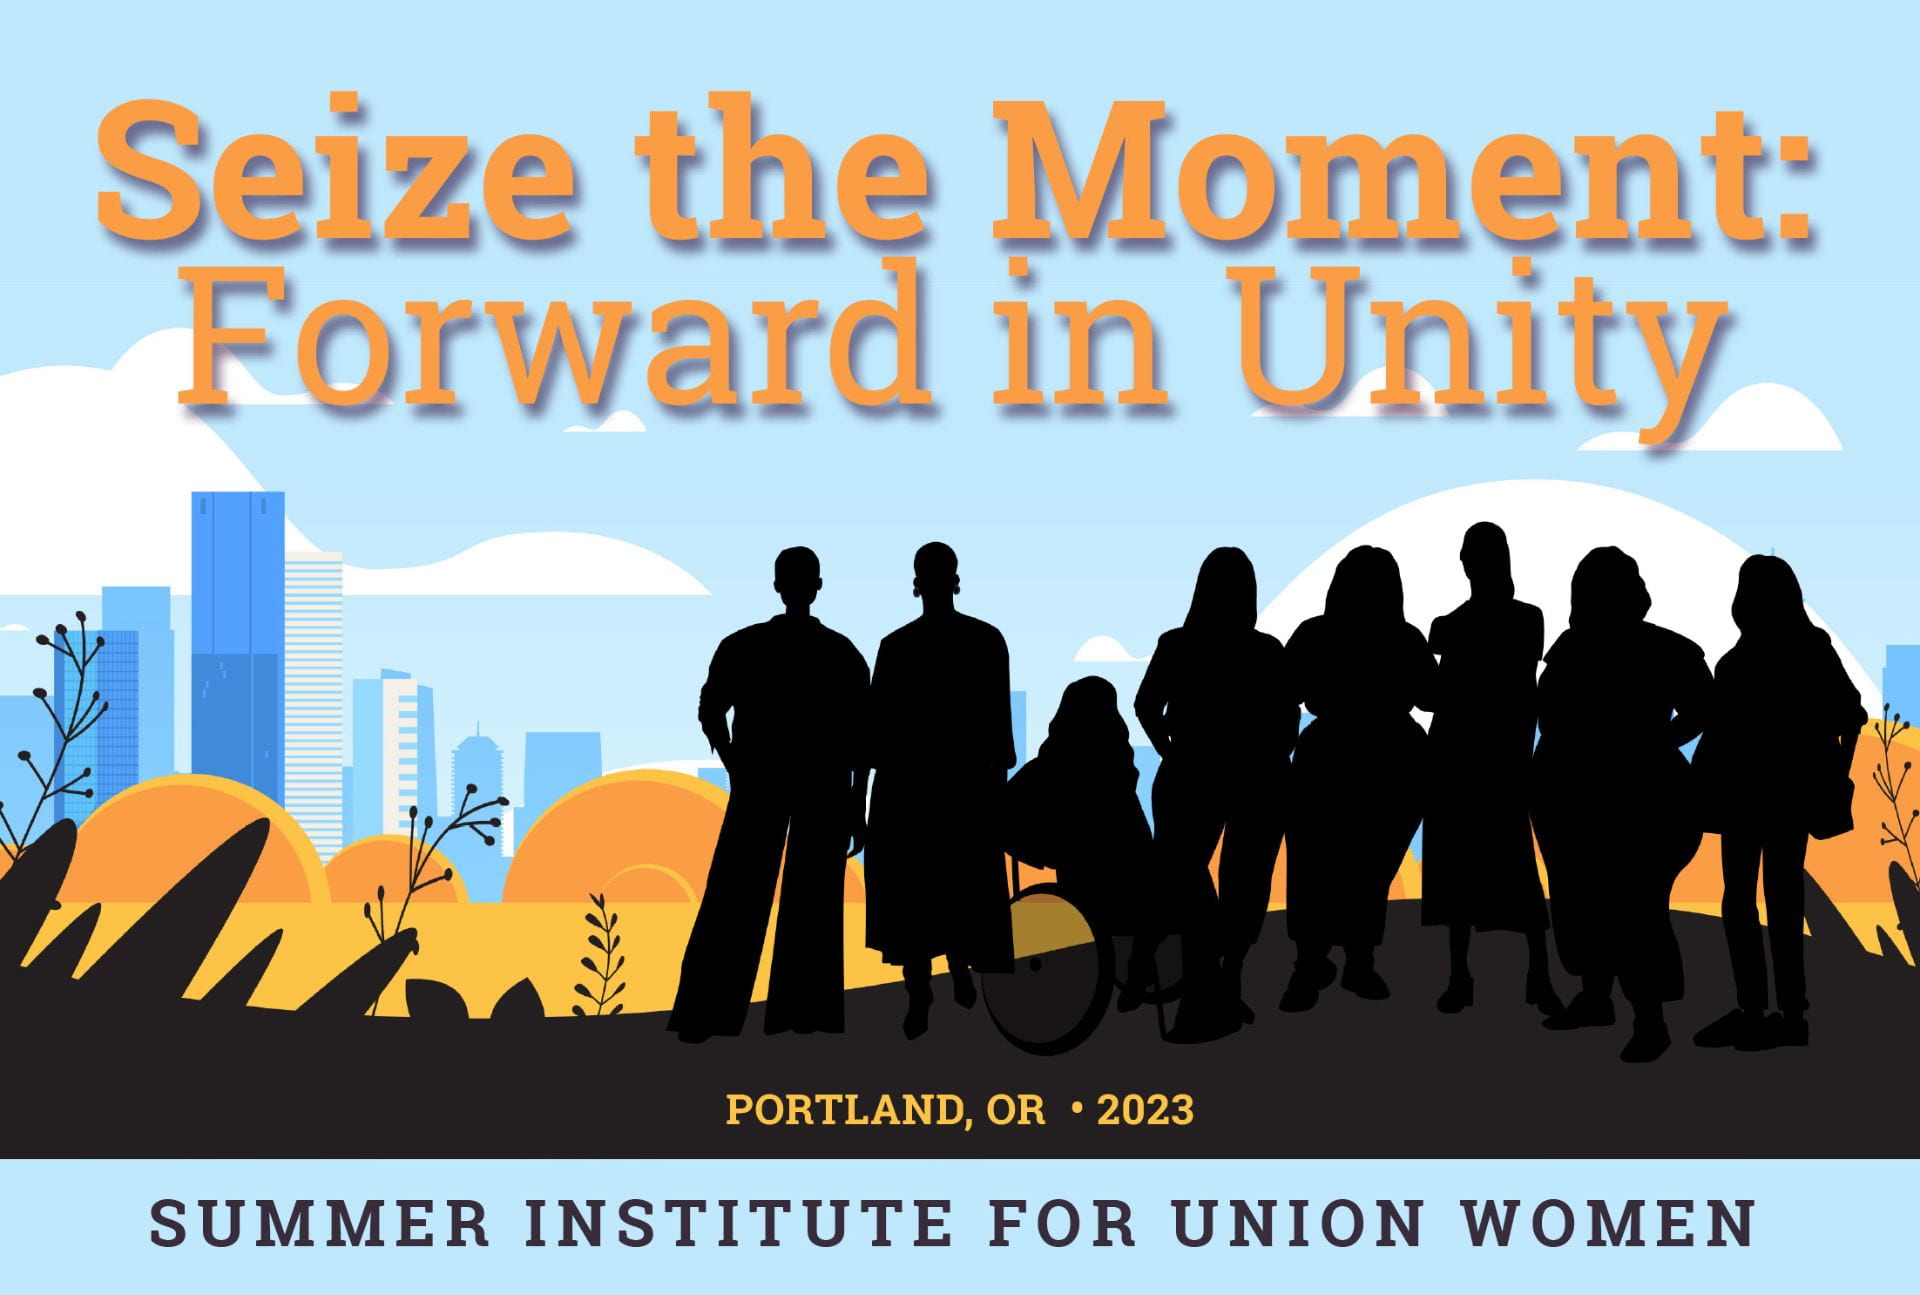 Seize the Moment: Forward to Unity, Summer Institute for Union Women 2023